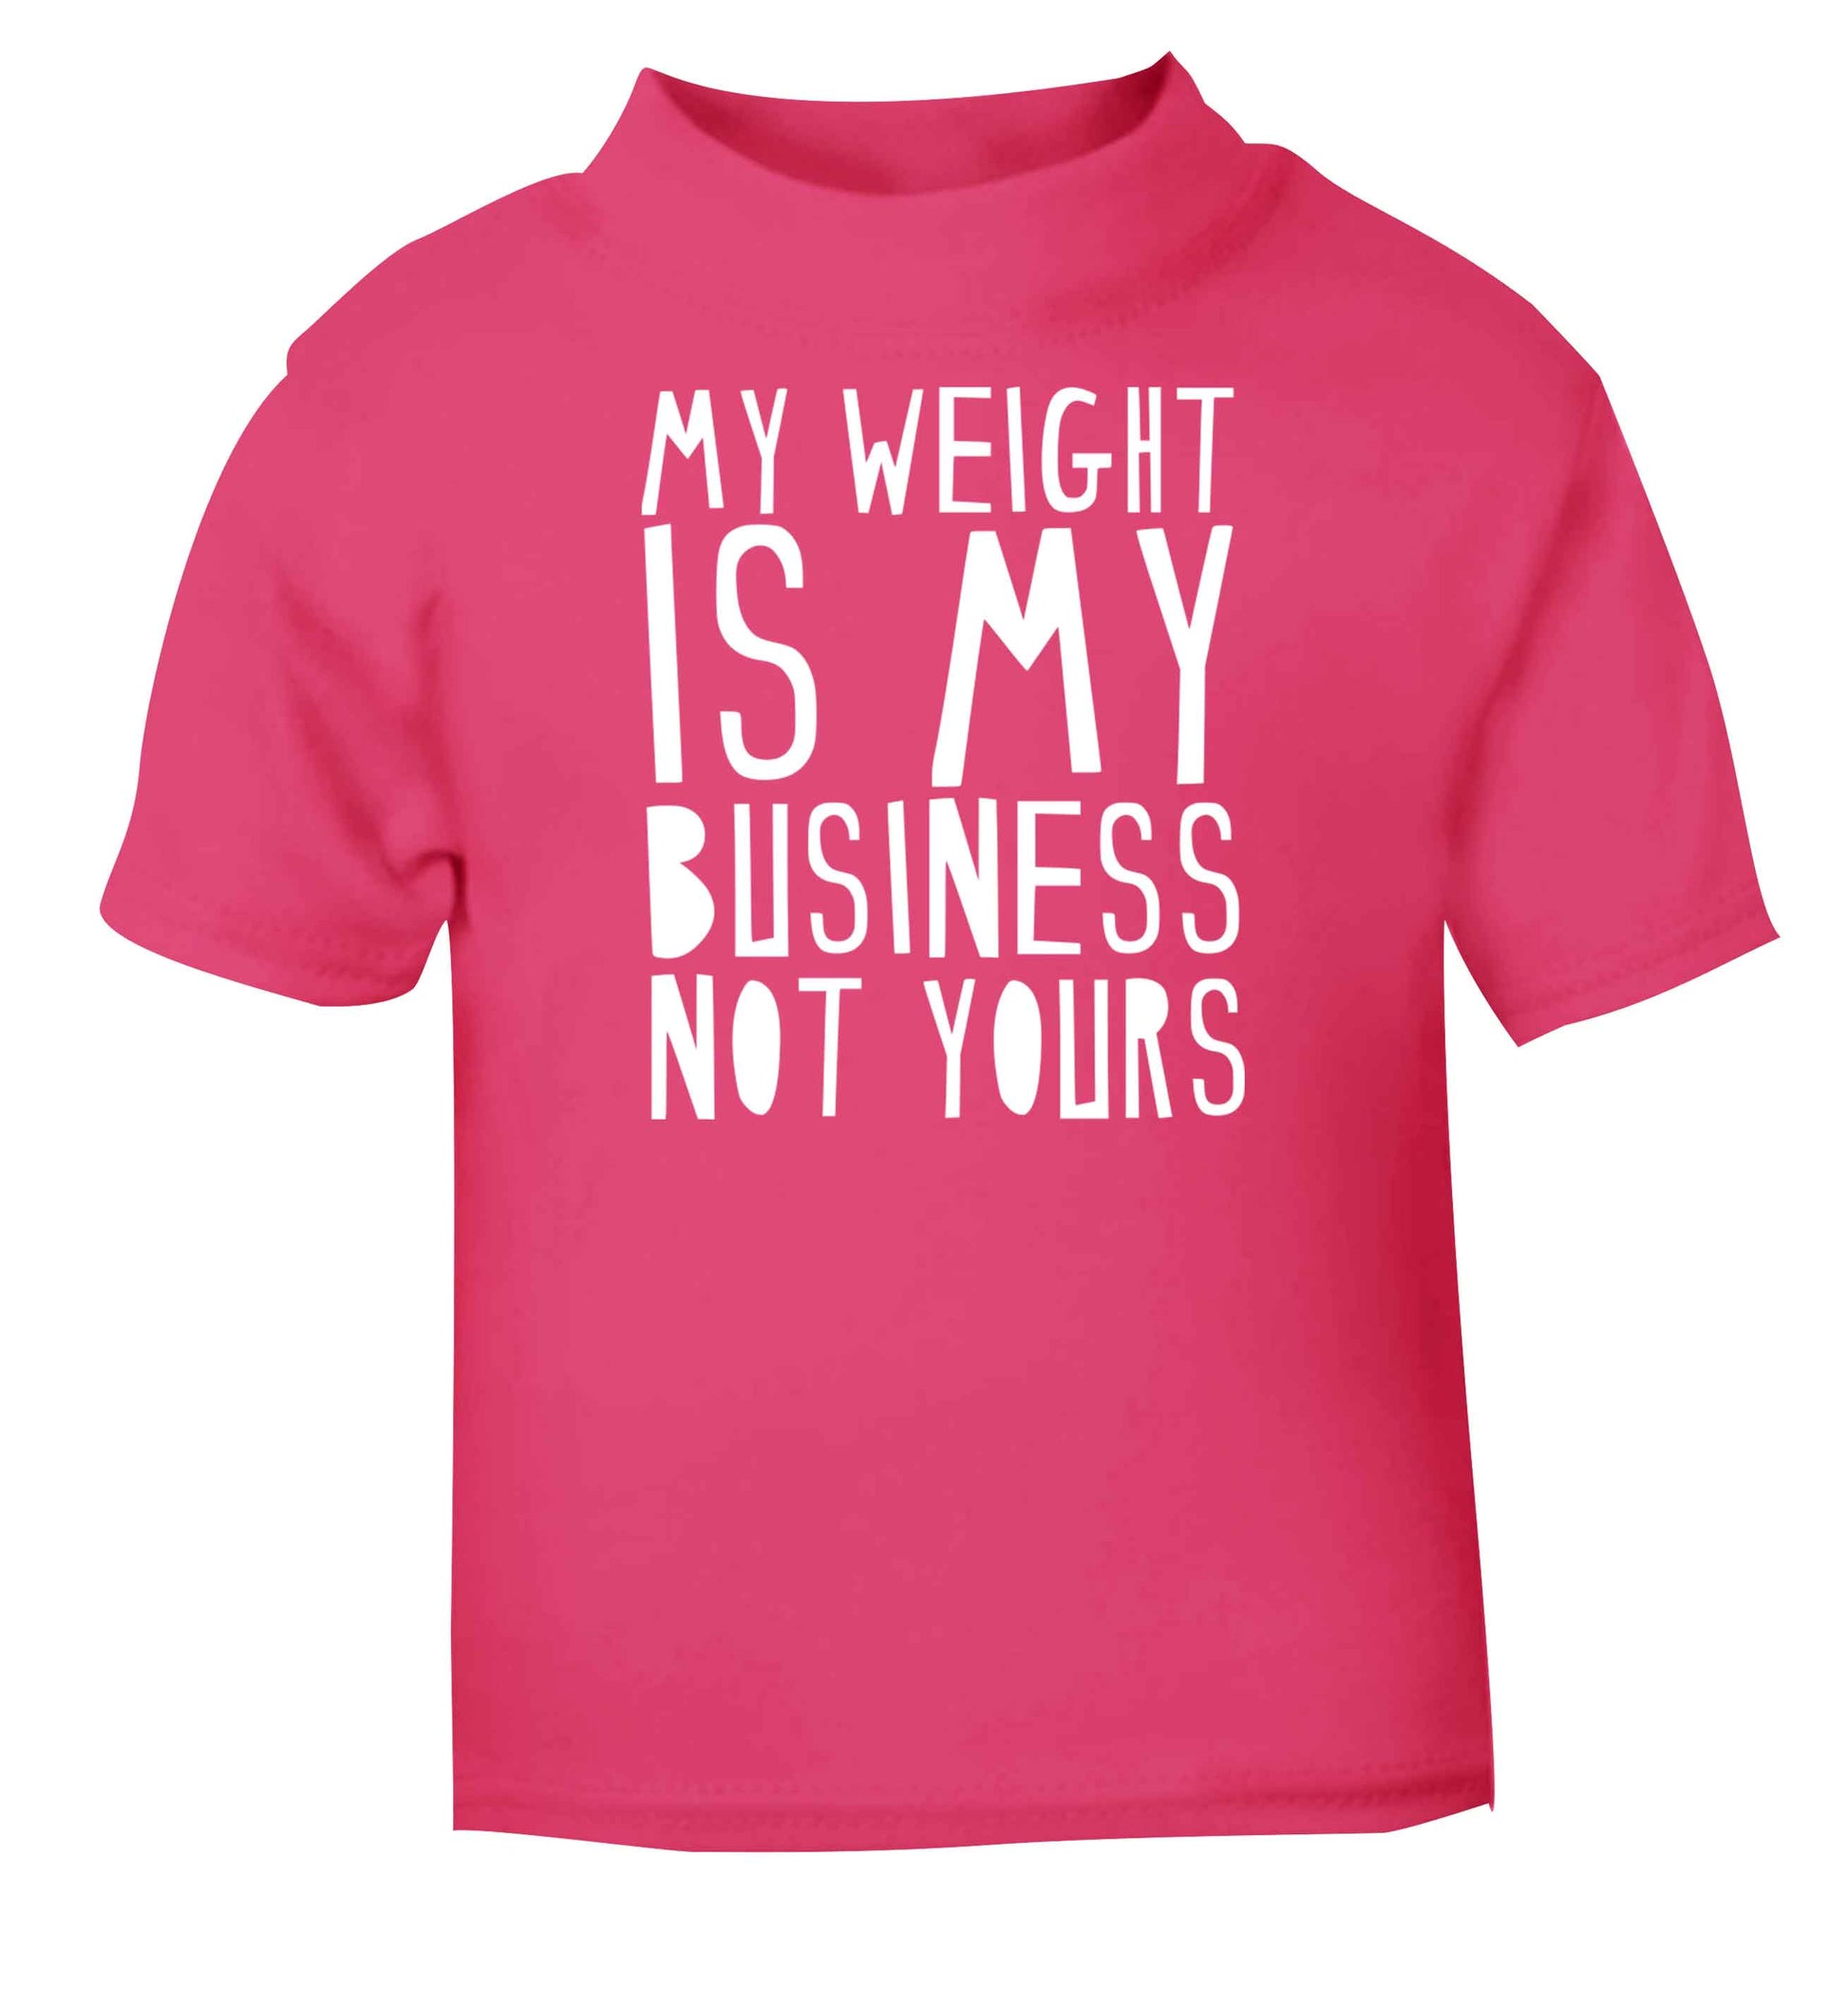 My weight is my business not yours pink baby toddler Tshirt 2 Years